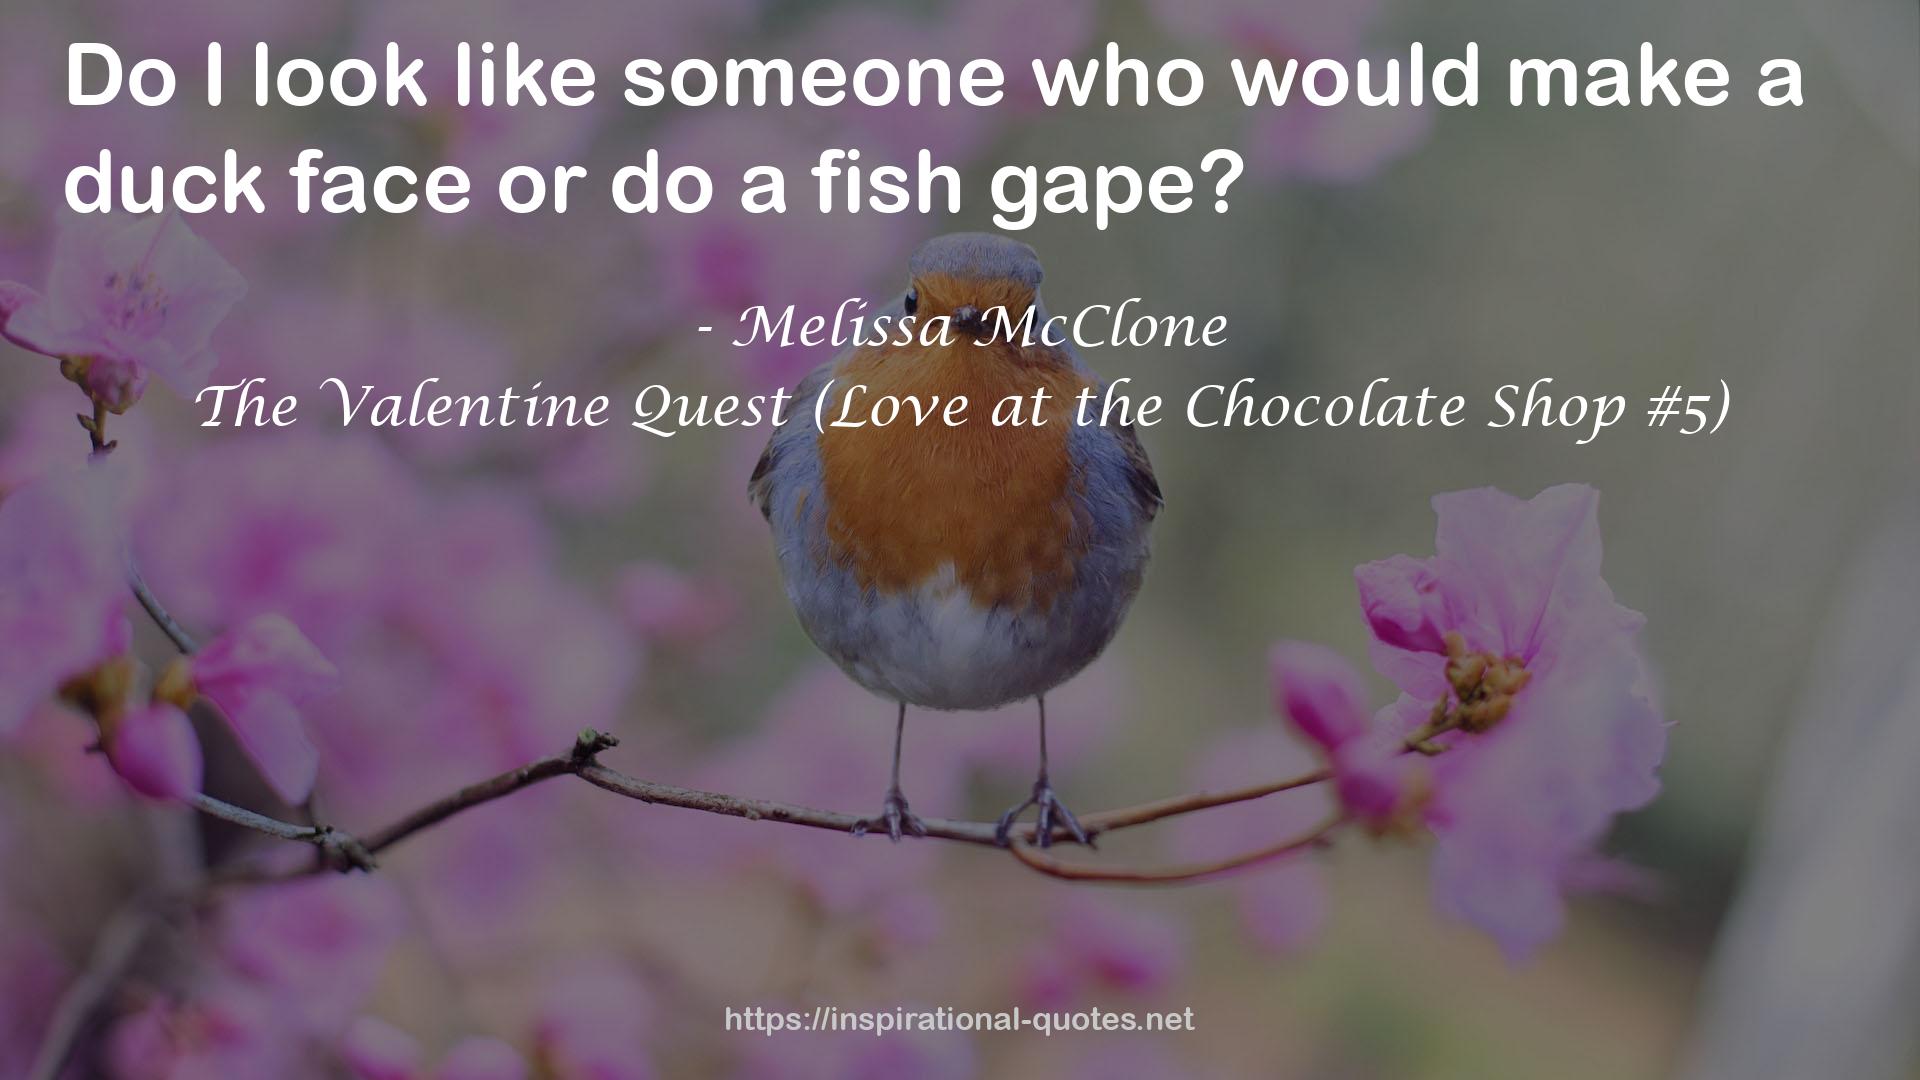 The Valentine Quest (Love at the Chocolate Shop #5) QUOTES